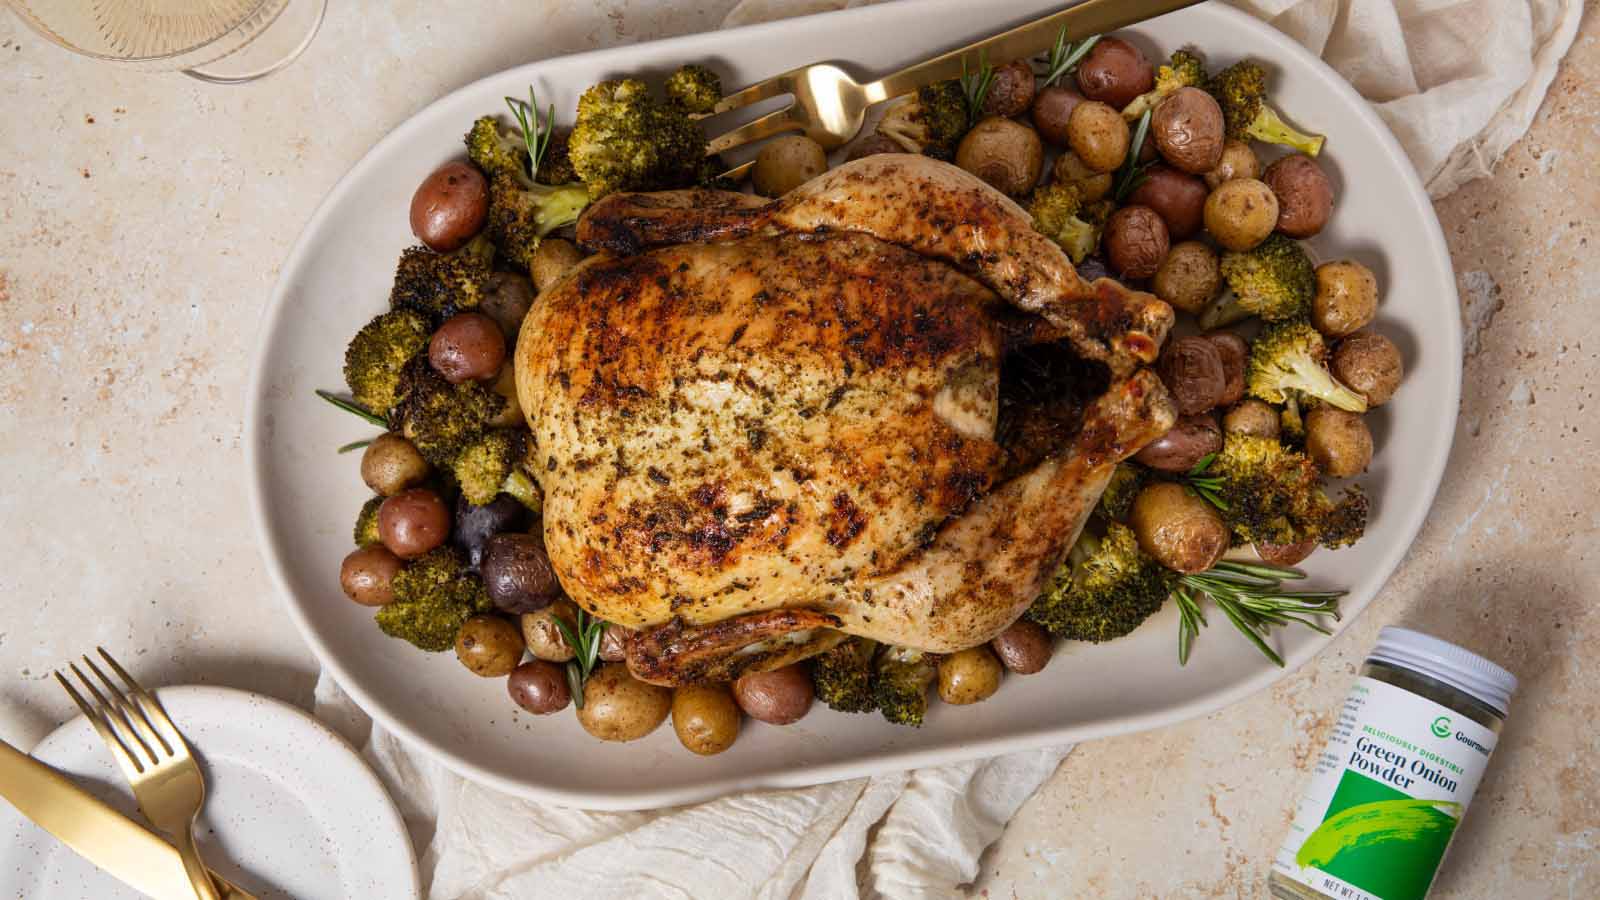 Gourmend recipe for low fodmap whole roasted chicken with lemon & rosemary potatoes